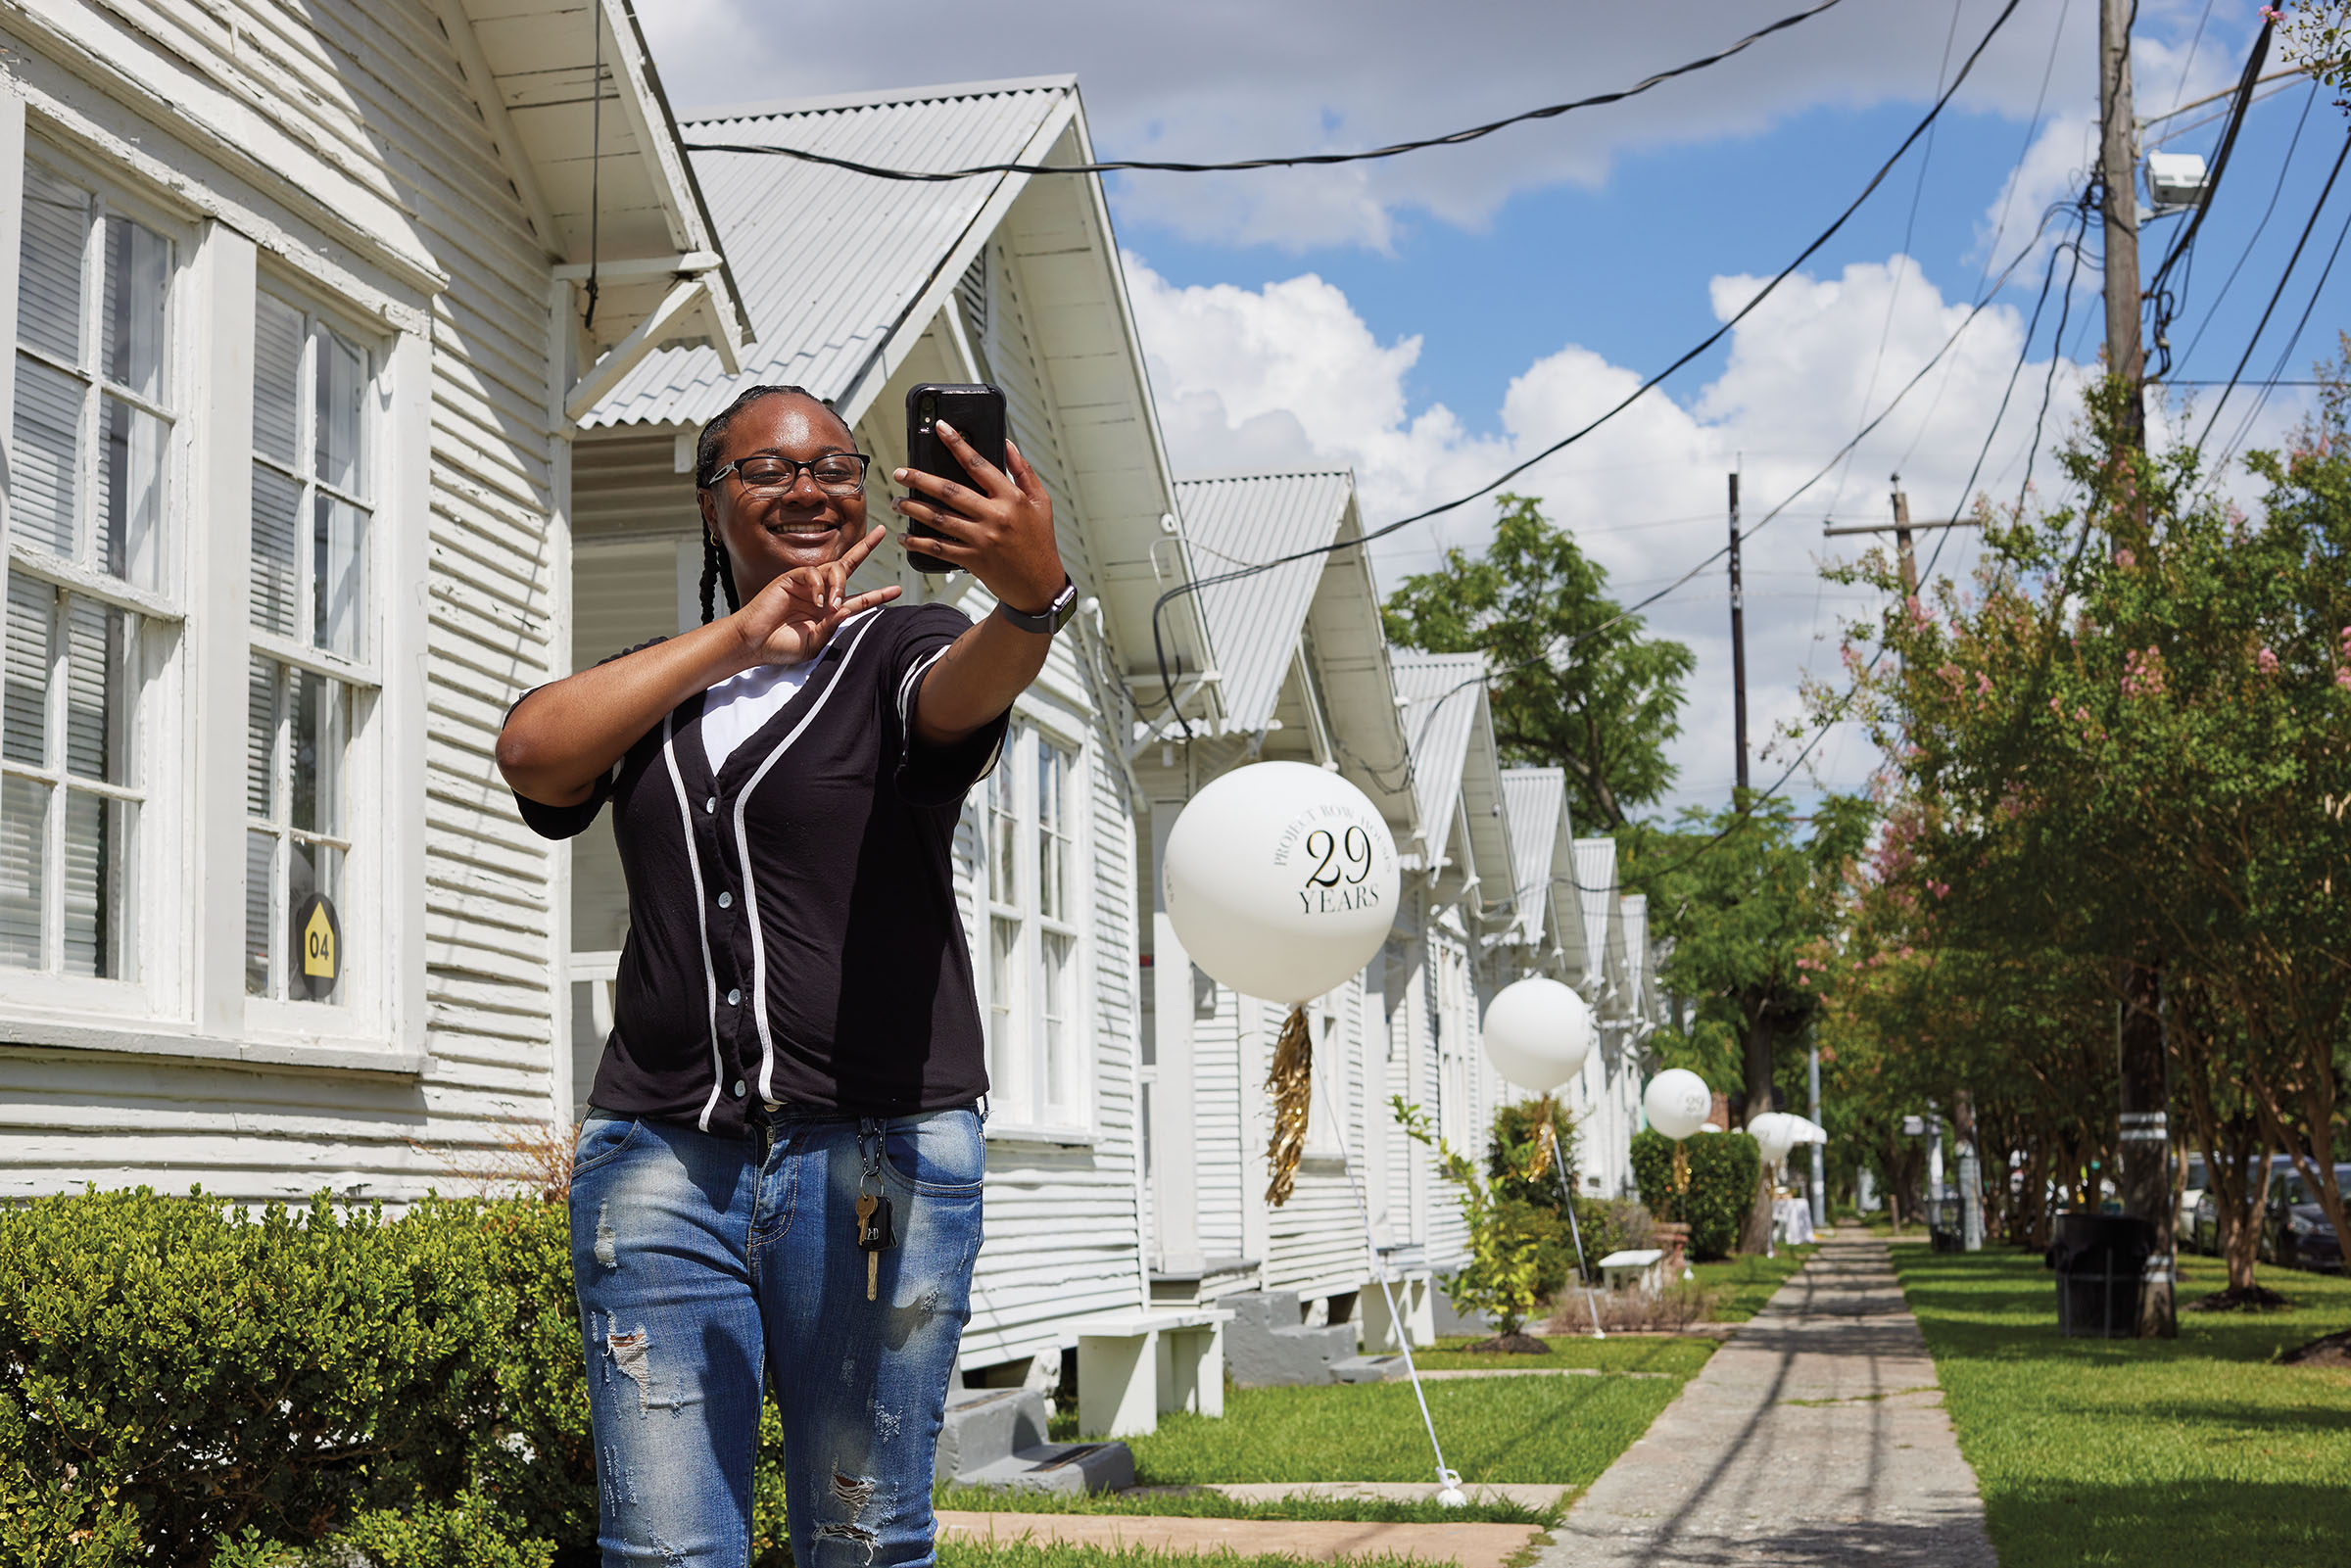 A woman in a black t-shirt and jeans takes a selfie in front of a collection of uniform white houses under blue sky